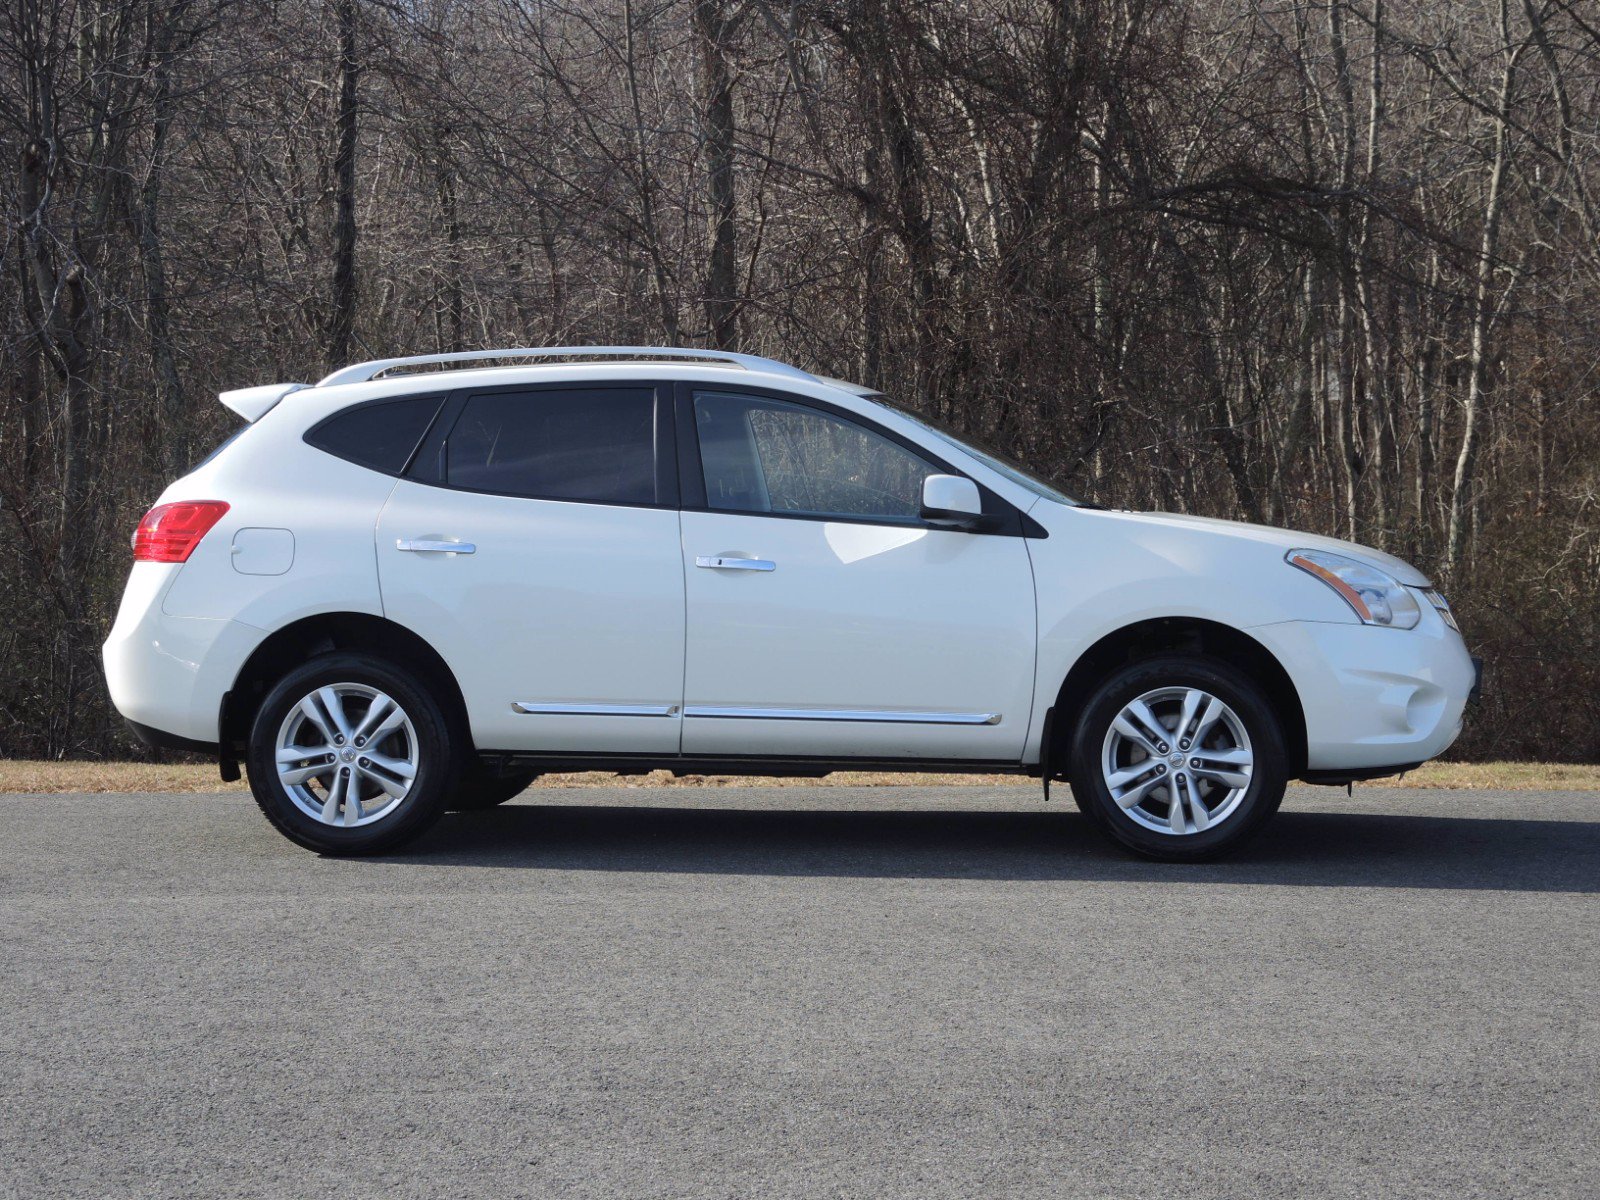 Pre-Owned 2013 Nissan Rogue SV Sport Utility in Milford #5180X | Acura ...